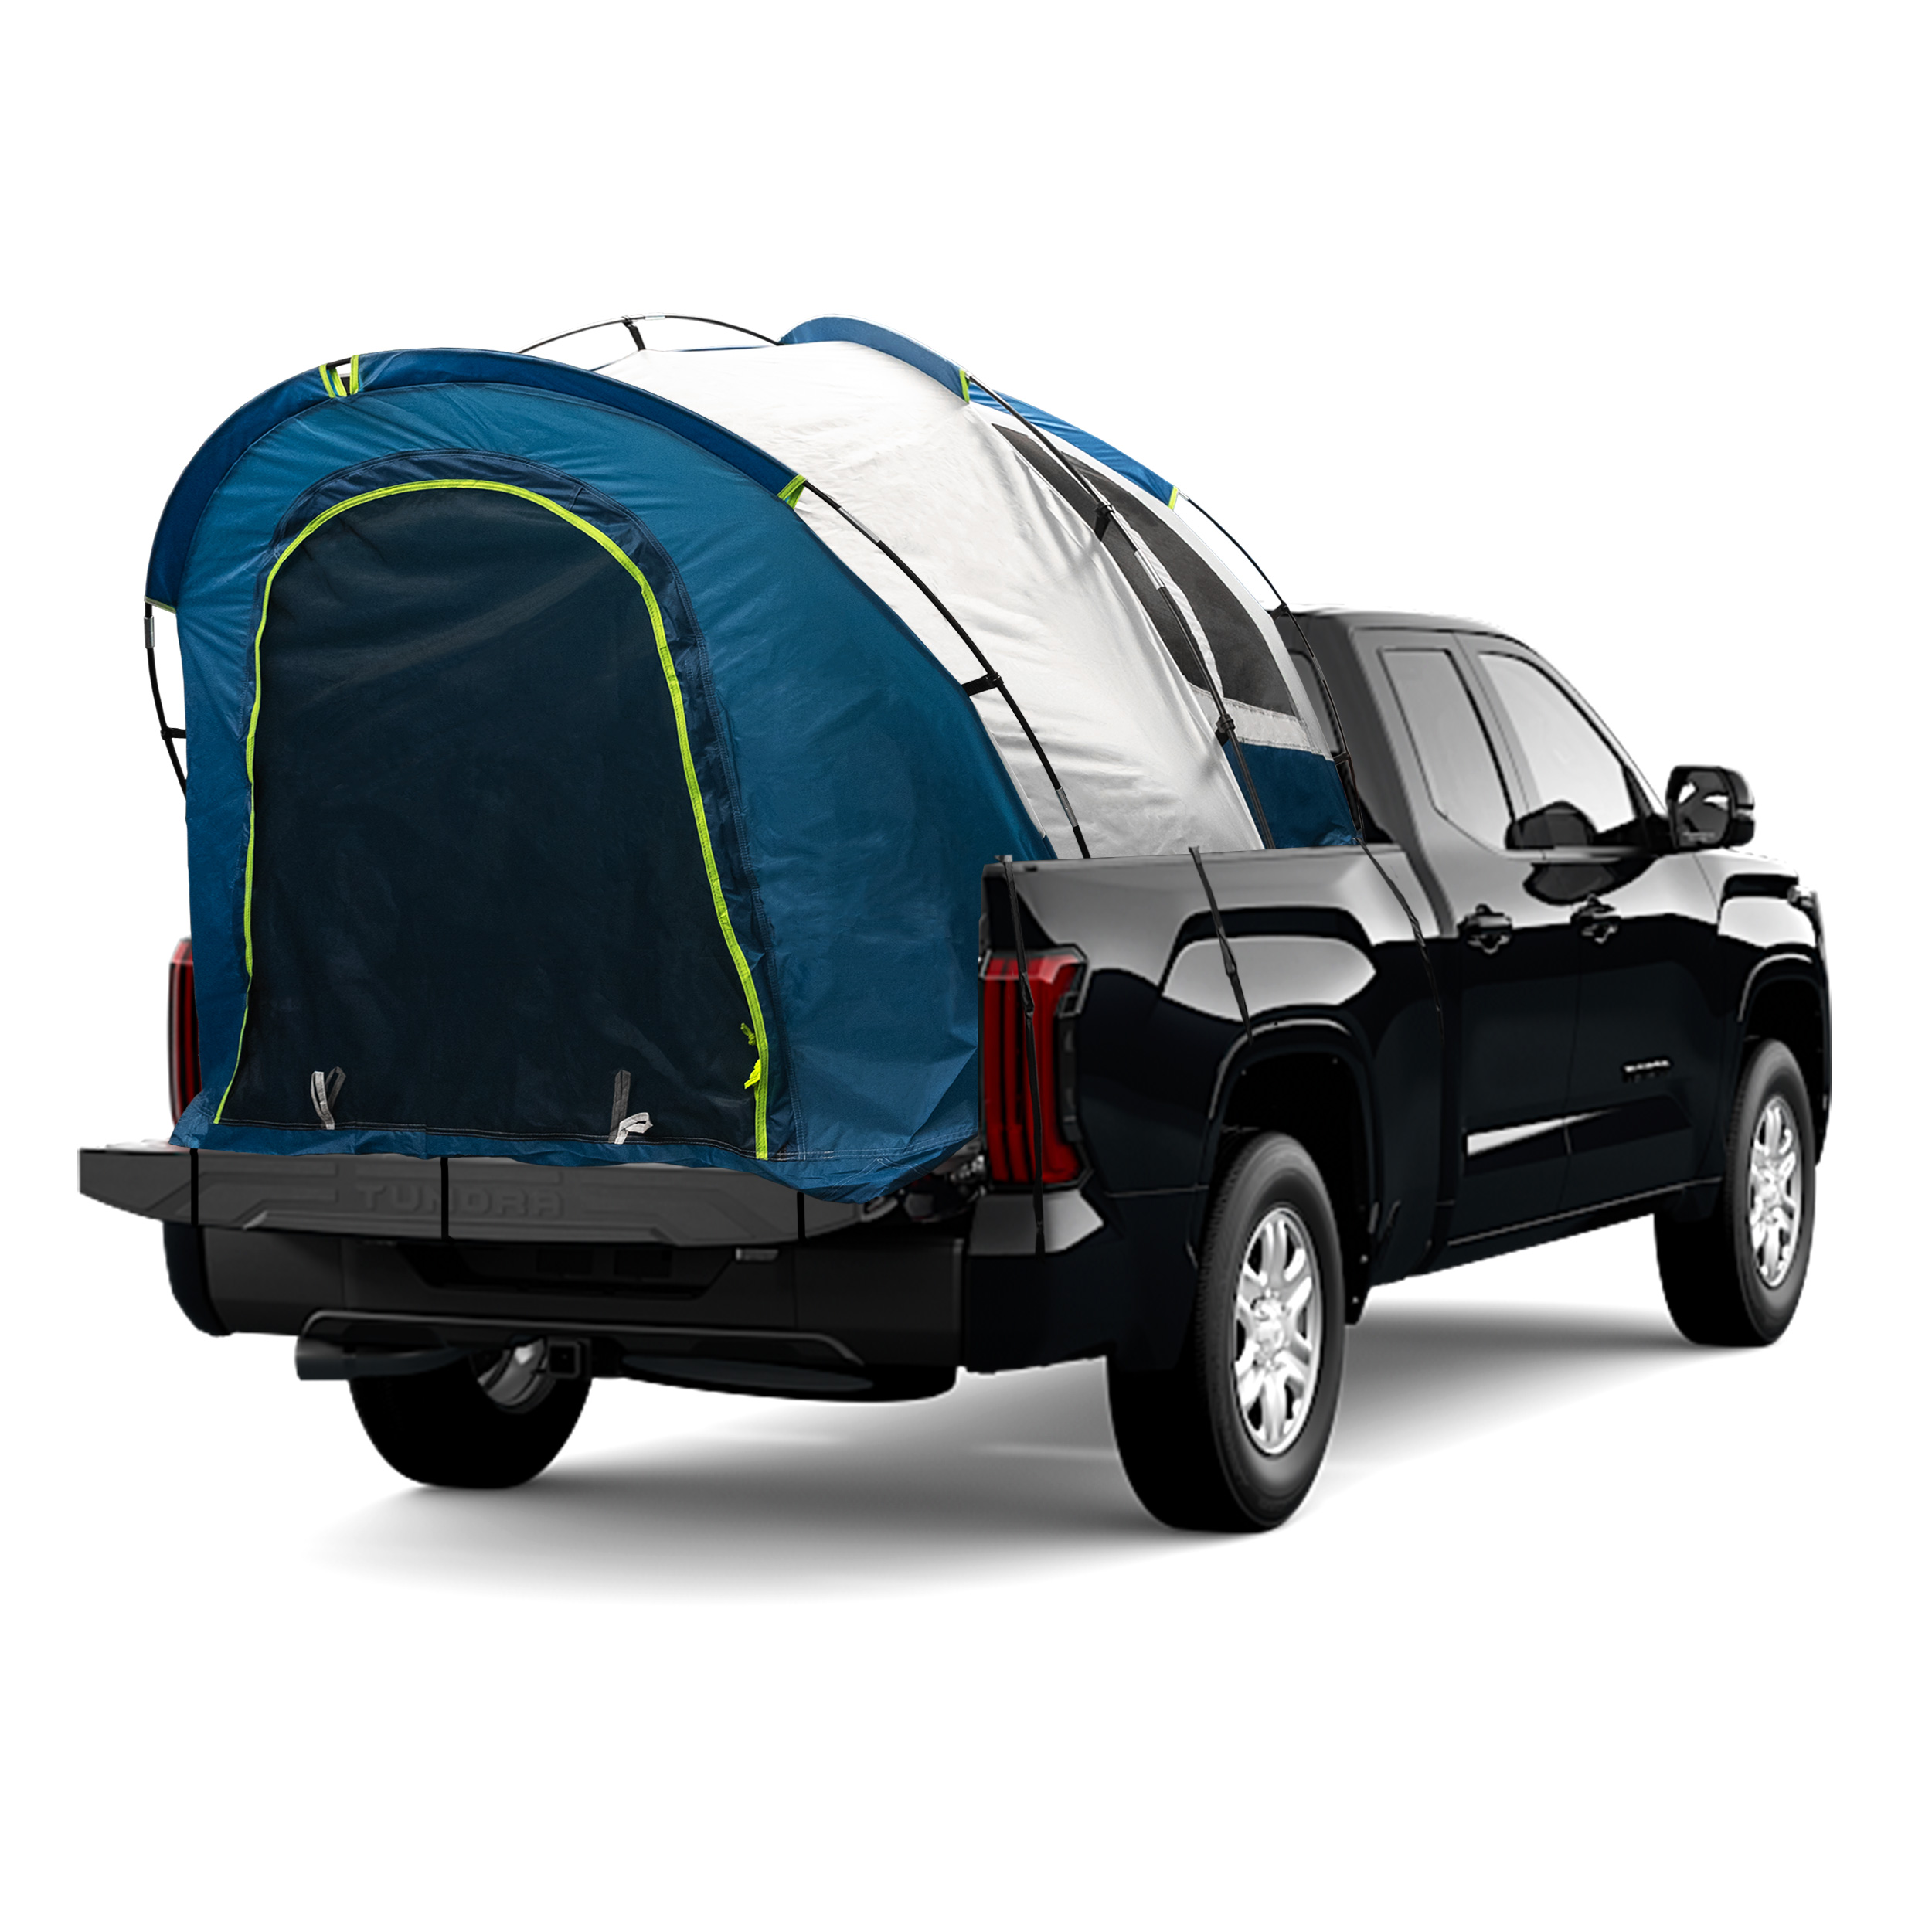 NEH Pickup Truck Bed Camping Tent, 2-Person Sleeping Capacity, Includes Rainfly and Storage Bag - Fits Full Size Truck with Regular Bed - 76"-80" (6.4'-6.7') - Gray and Blue - image 1 of 8